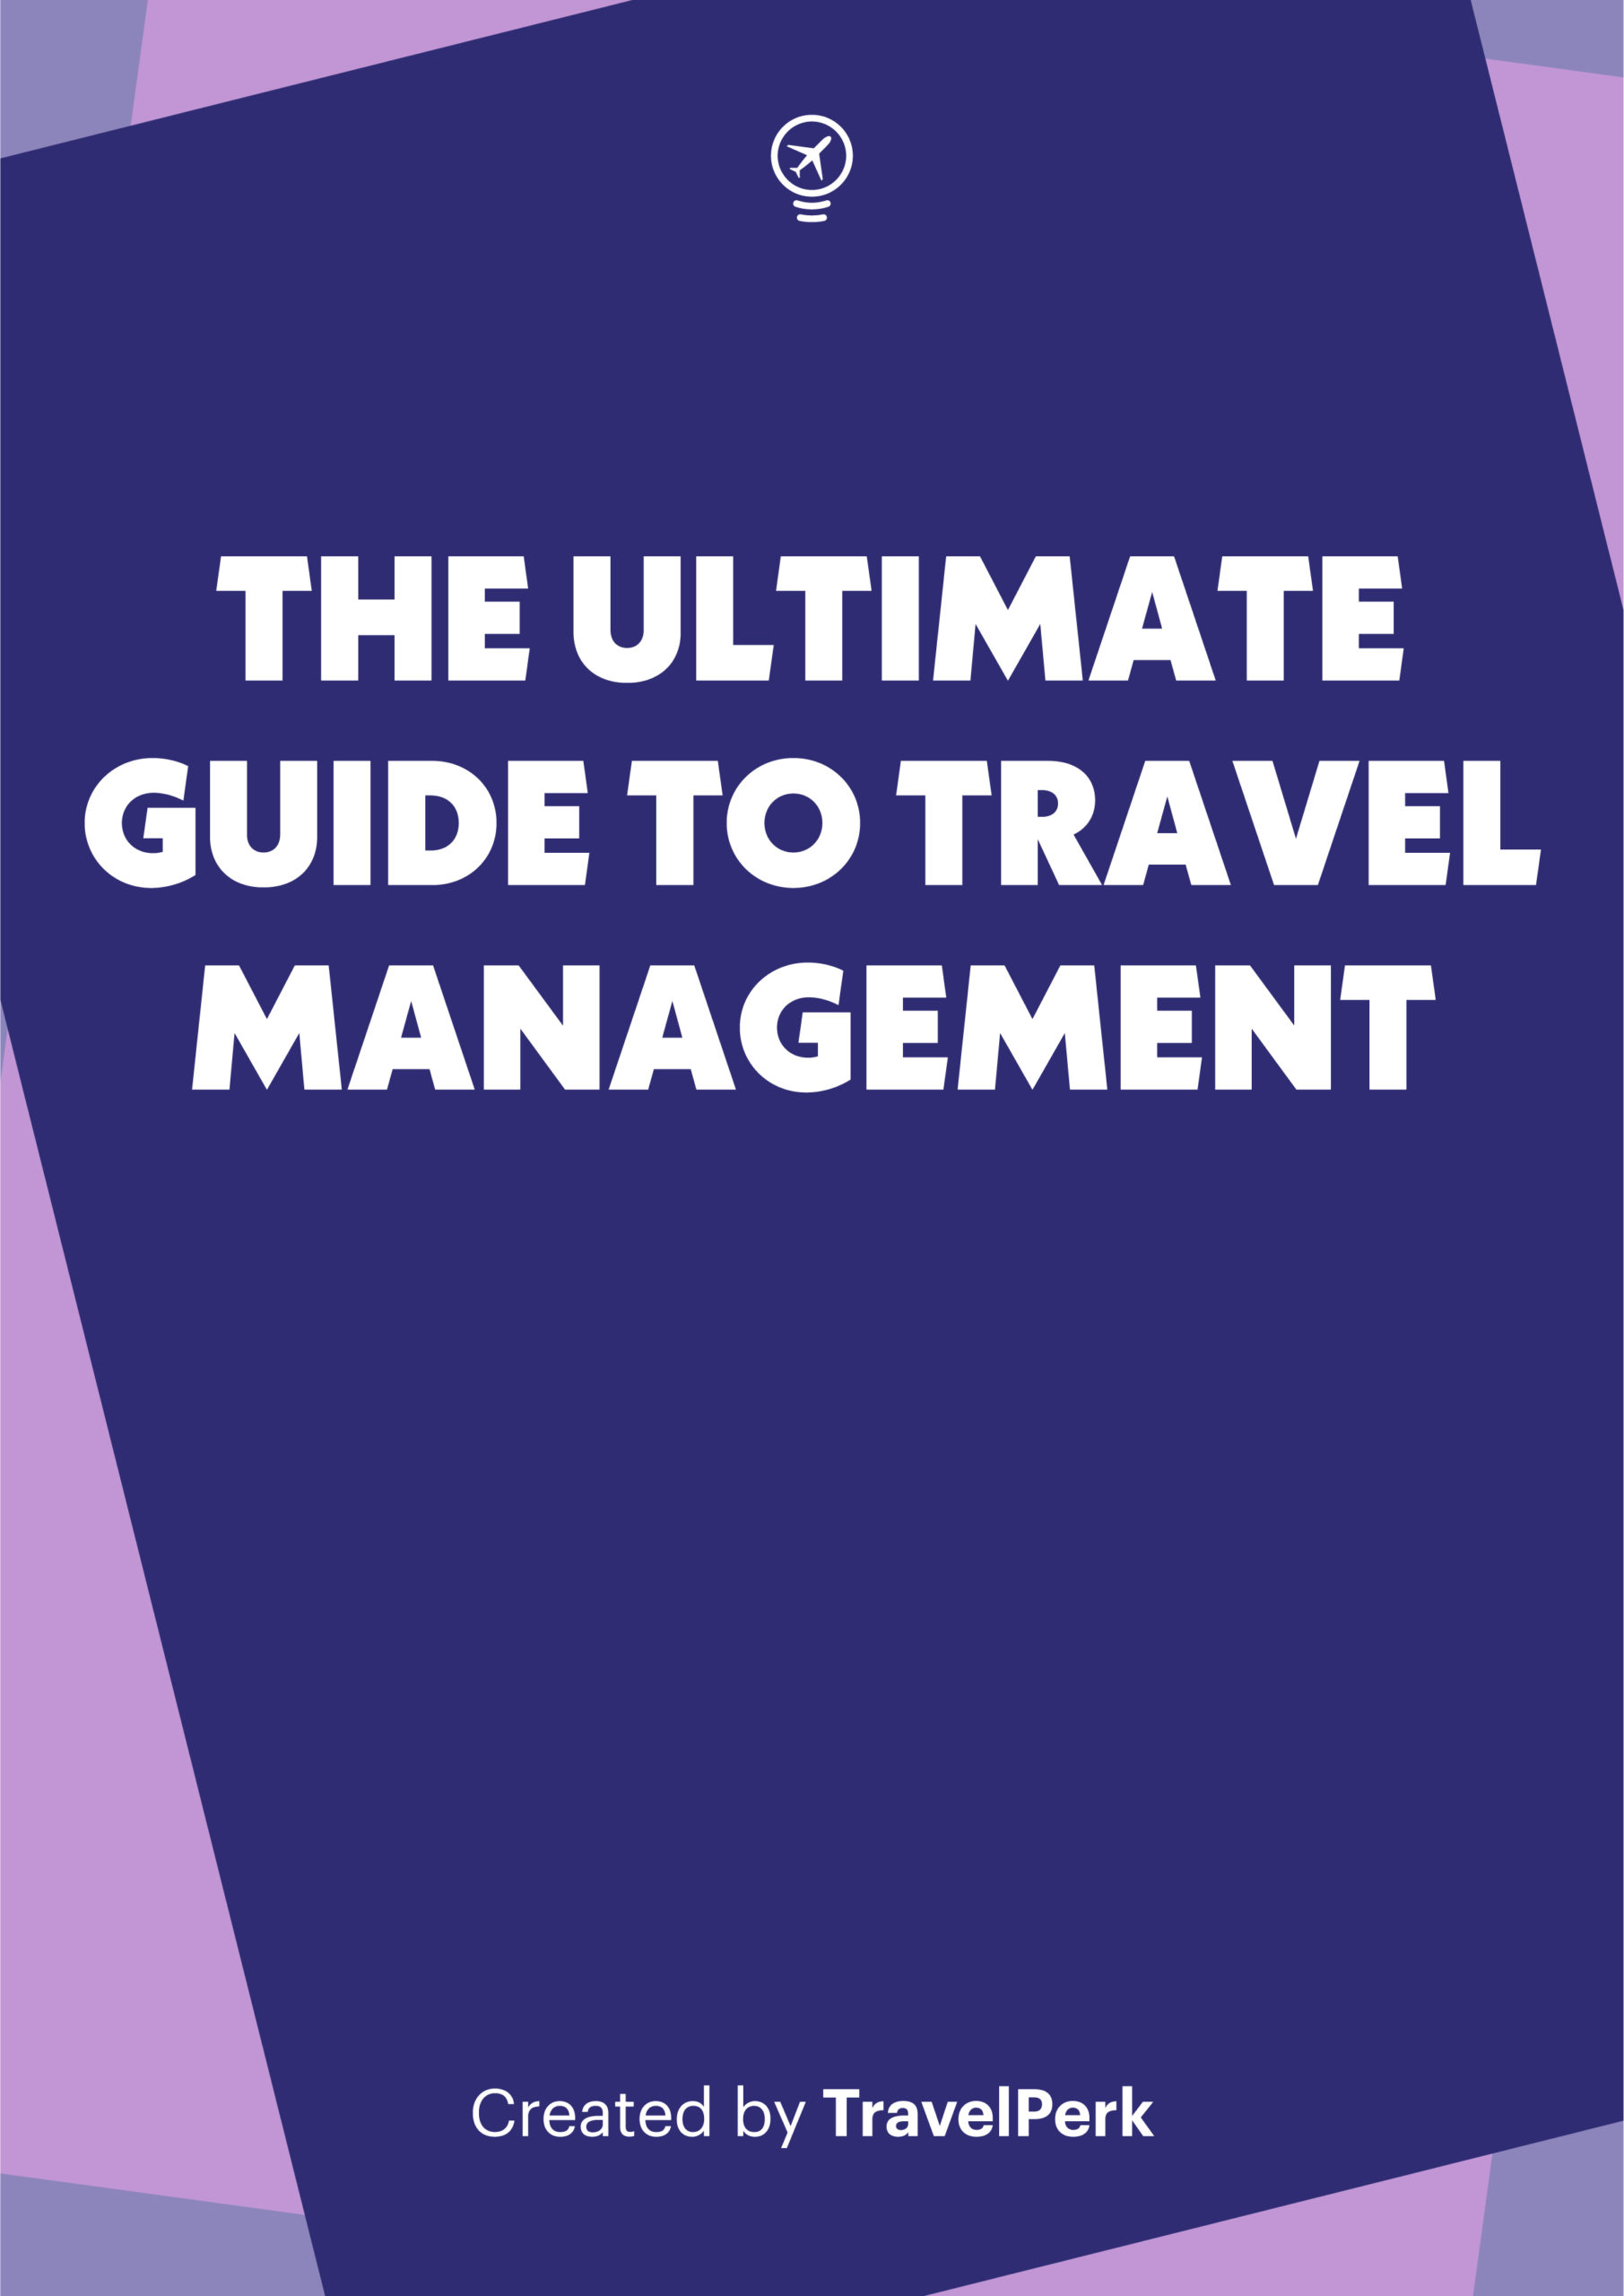 Travel management: the ultimate guide